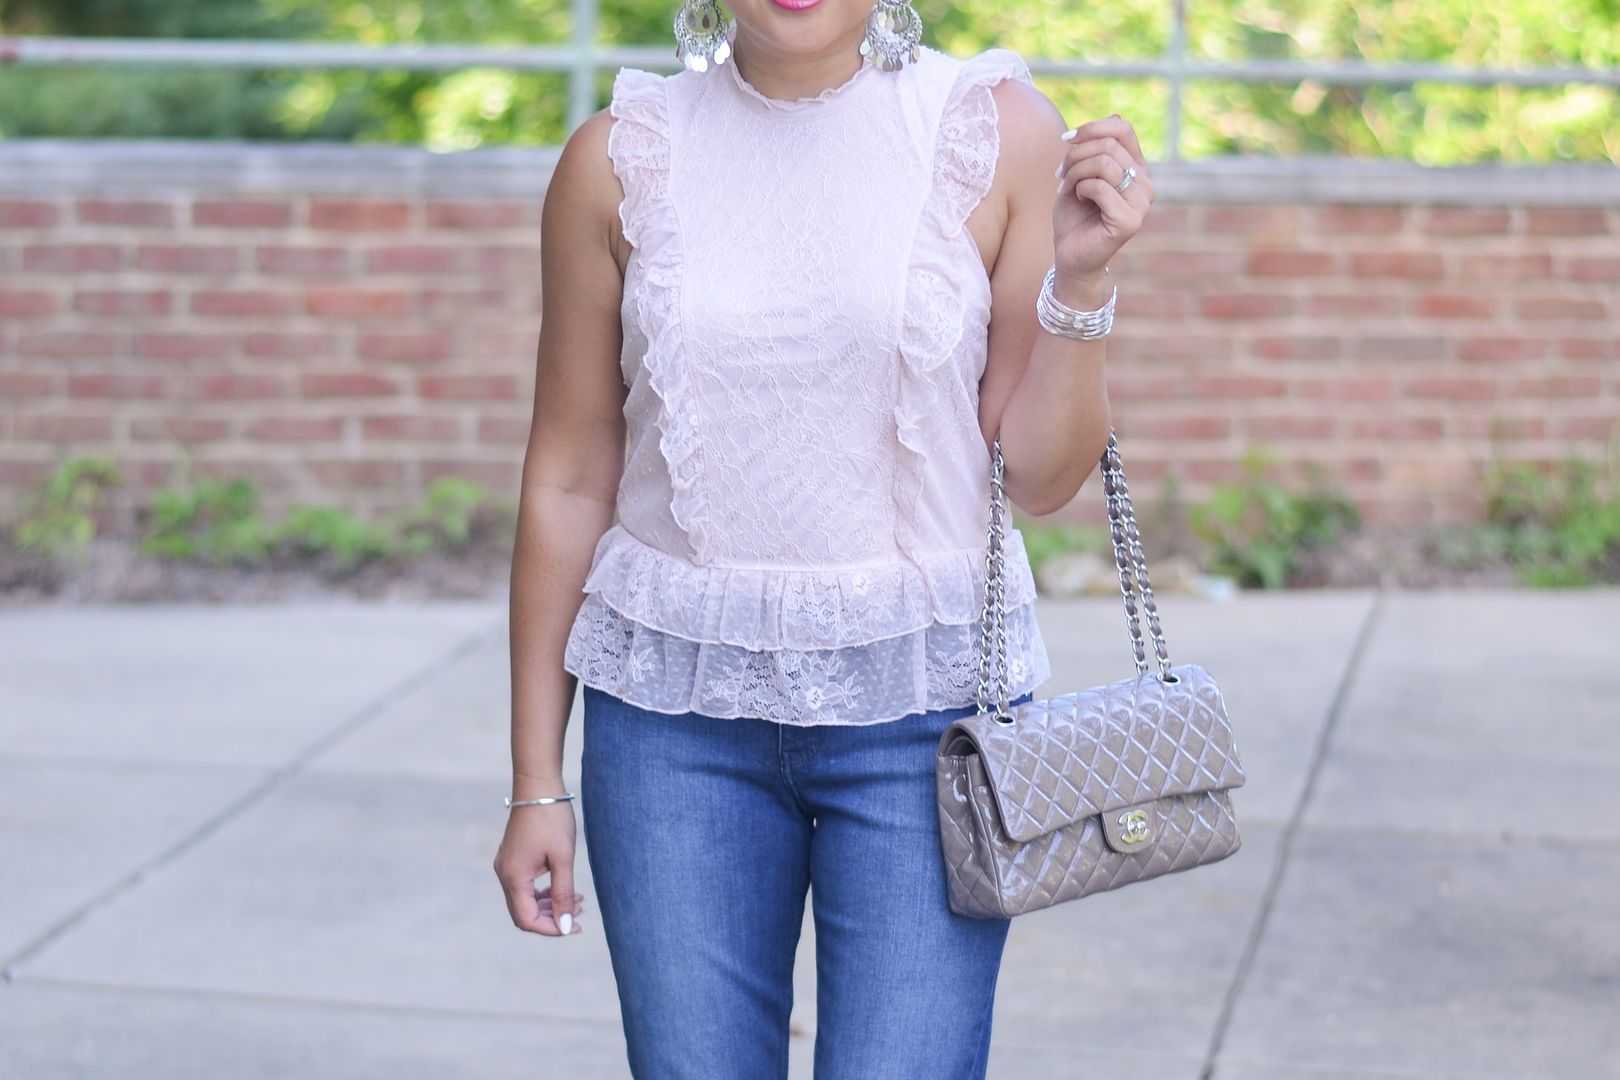 Express lace top